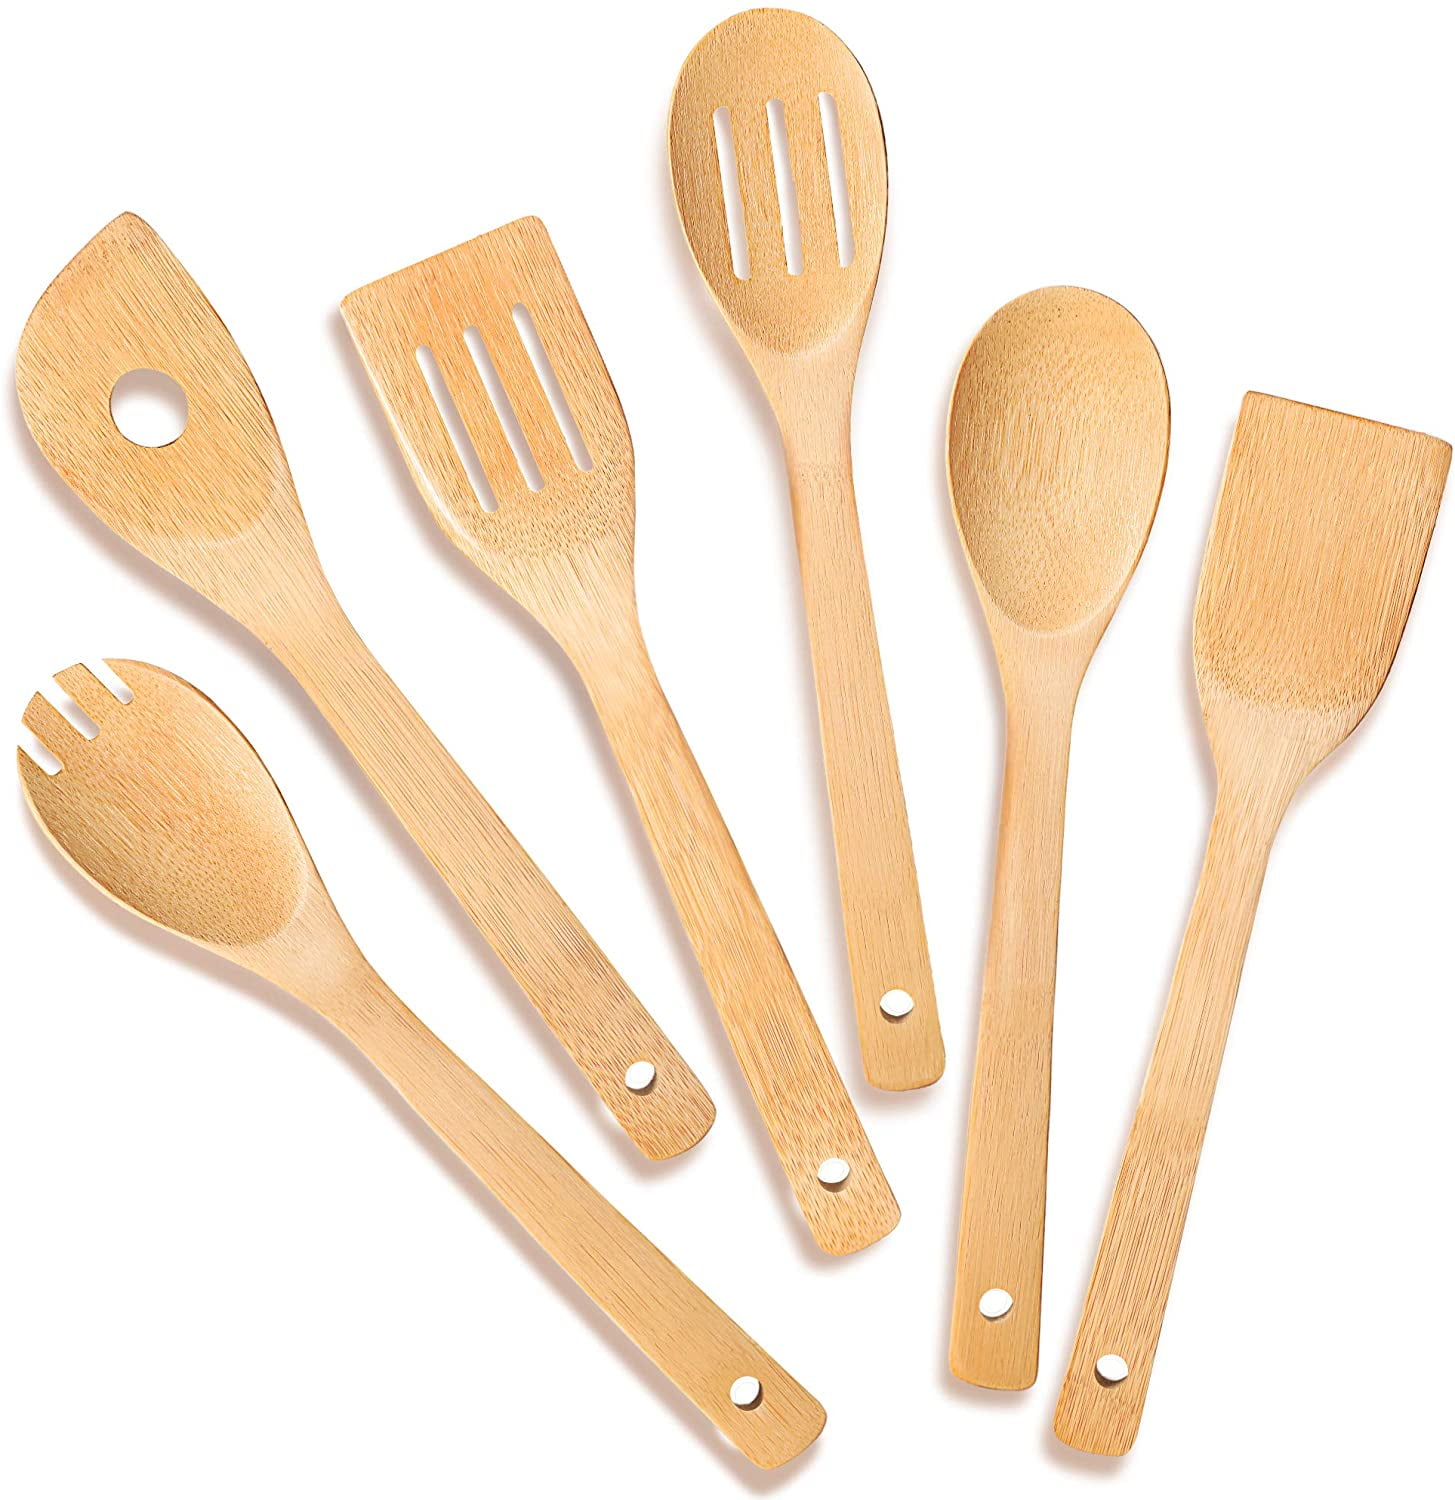 6 Piece Bamboo Kitchen Cookware Tool Set Spoon Spatula Turner with Holder Wooden Cooking Utensils Set Tools 